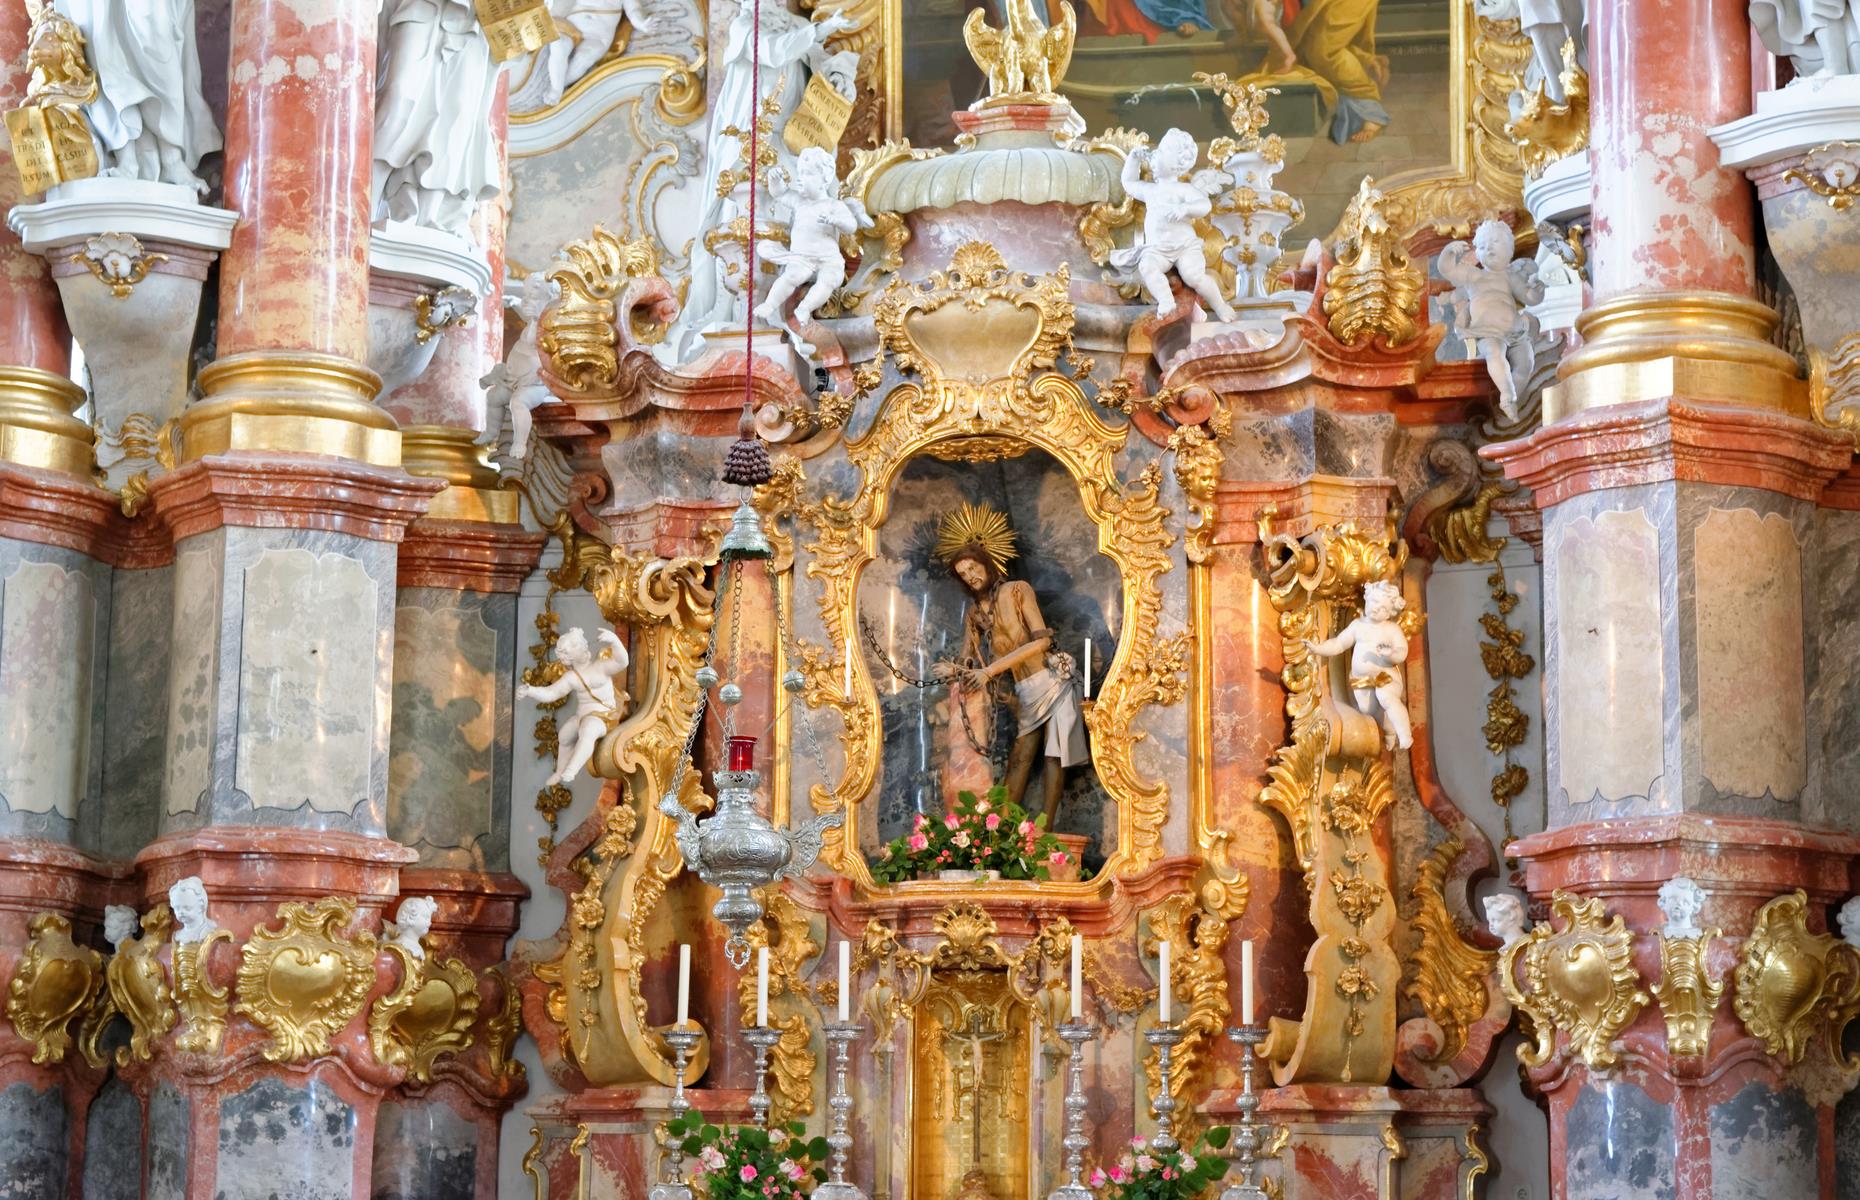 <p>The miracle happened before <a href="http://whc.unesco.org/en/list/271">this Rococo church</a> was created – though, looking at its riotously ornate interior, this incredible structure itself seems pretty miraculous. In 1738, it’s said a wooden figure of Christ, mounted on a column in the hamlet of Wies in Bavaria, was seen to shed tears. In response to the miracle, a simple wooden chapel was erected to house the statue – and it became a pilgrimage site. Architect Dominikus Zimmermann thought the statue deserved more, building his opulent masterpiece between 1745 and 1754.</p>